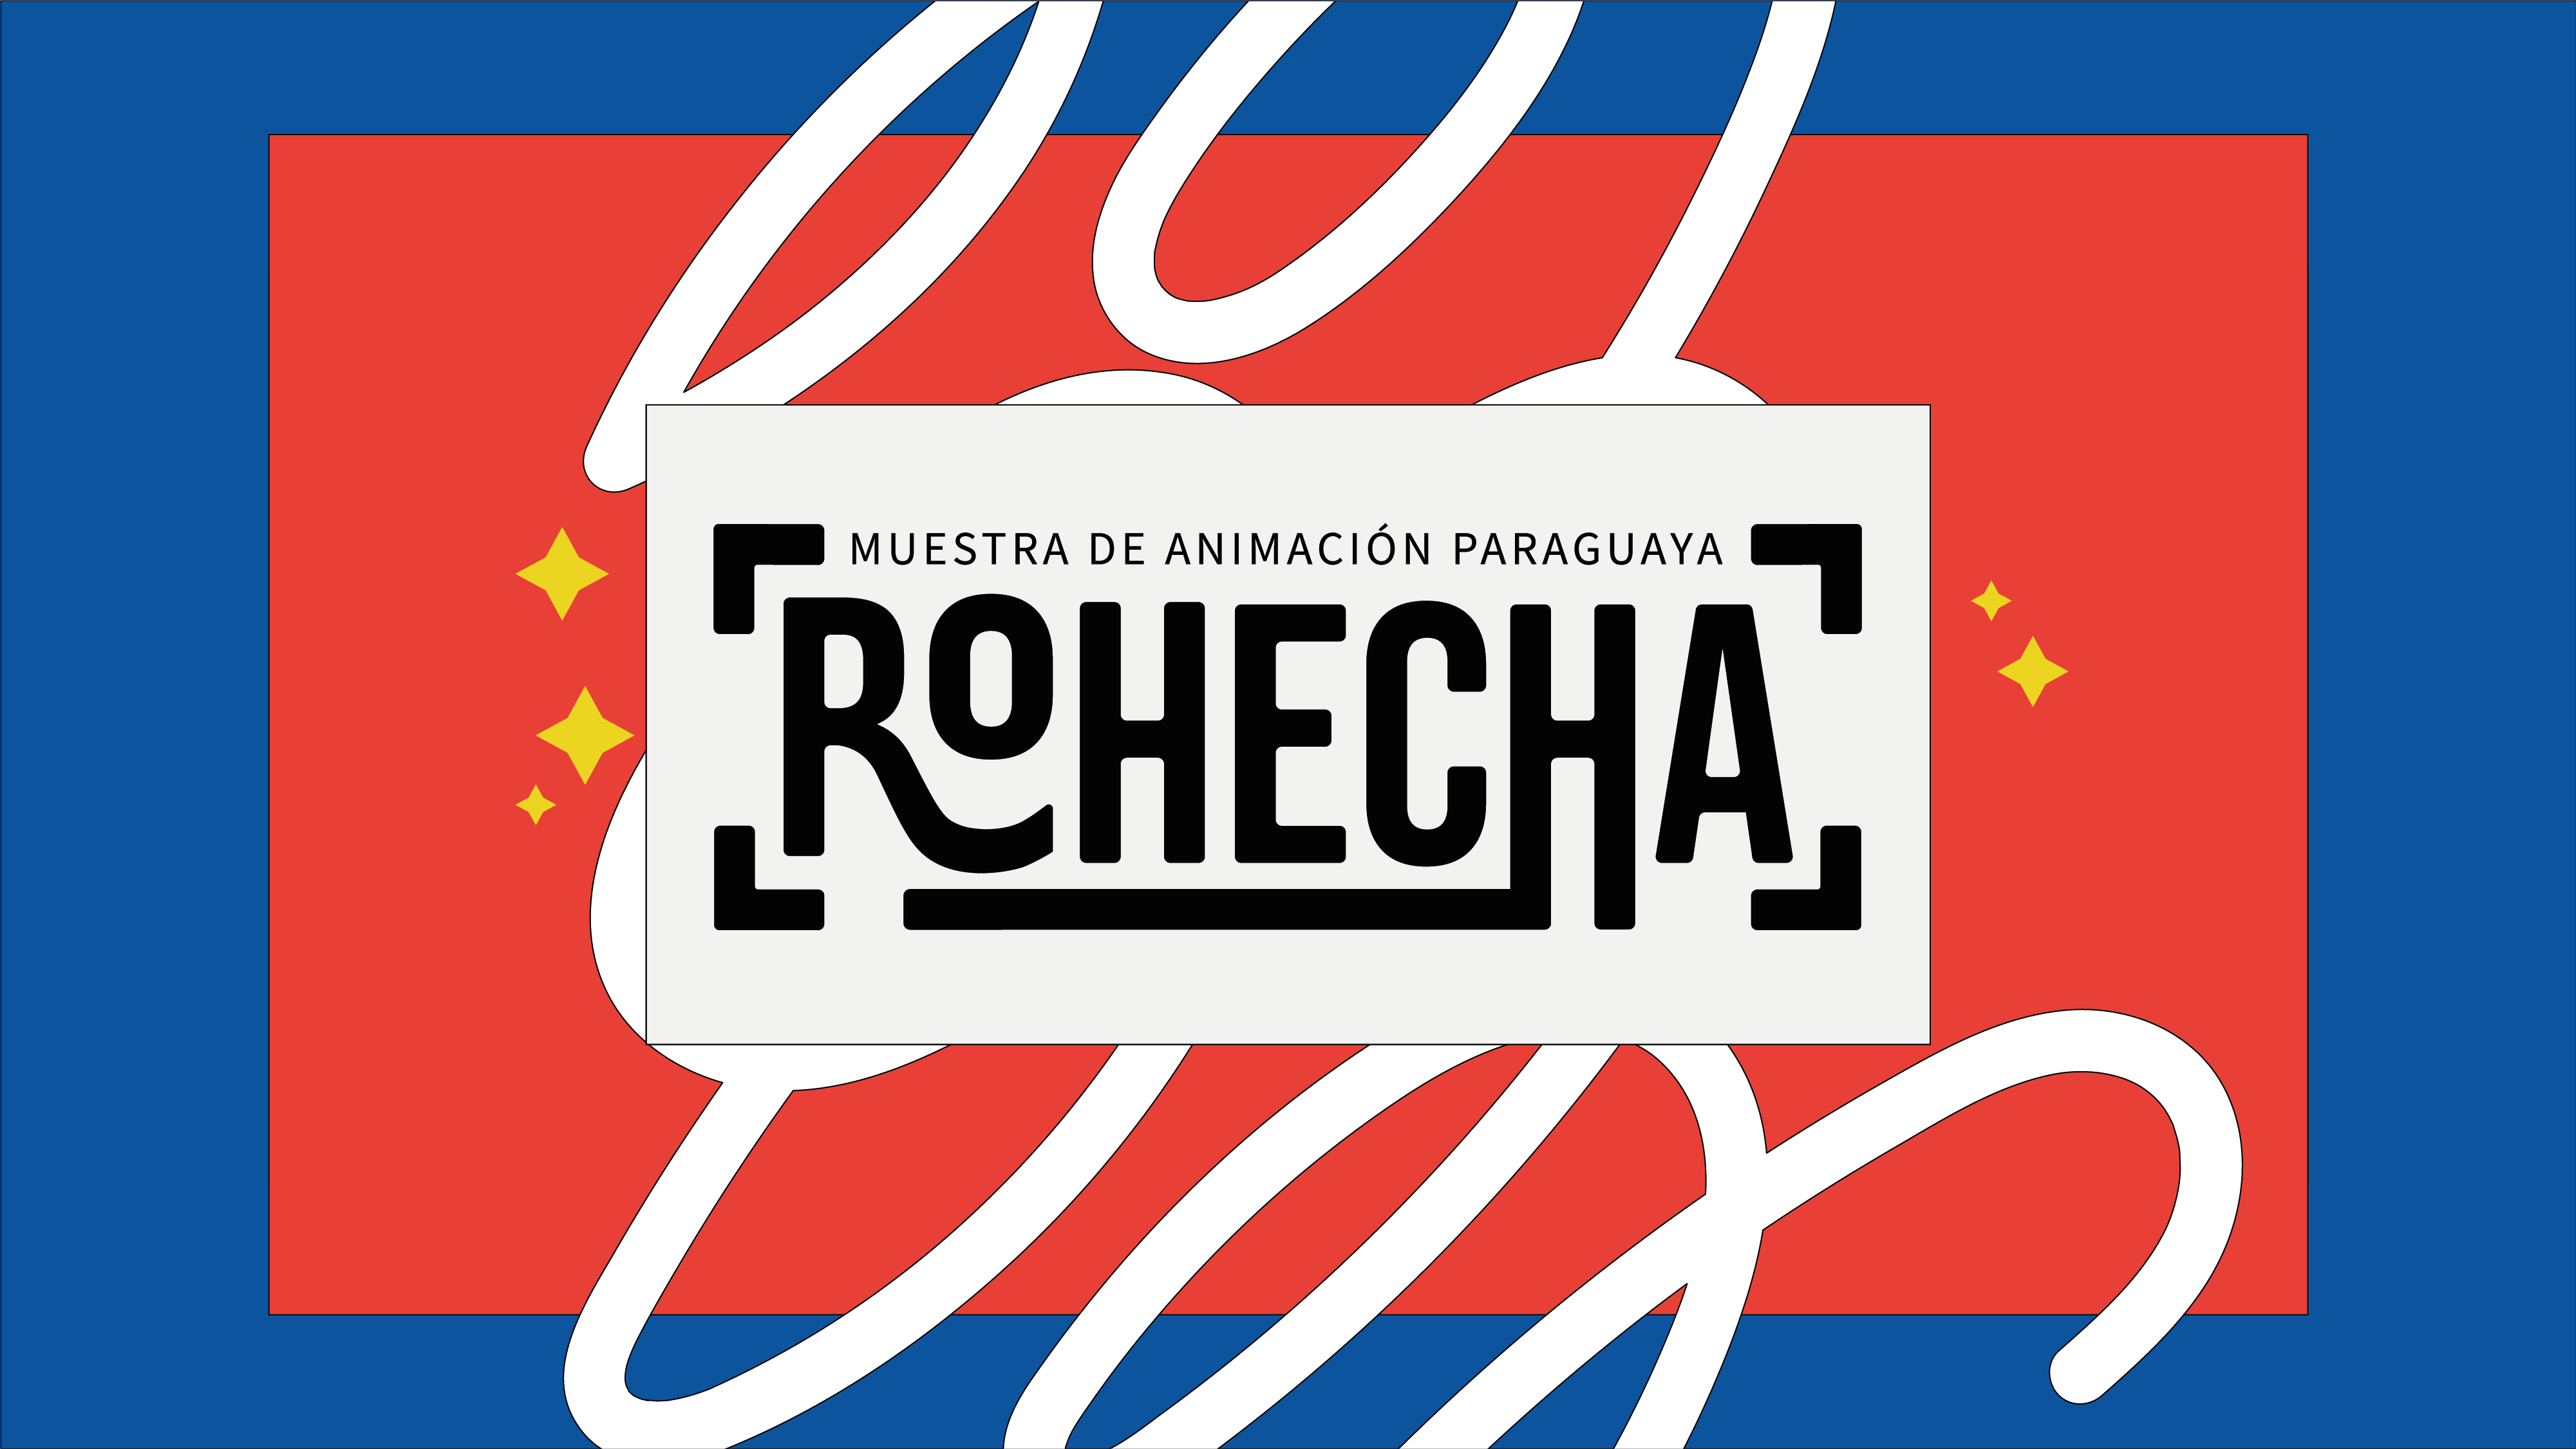 Rohecha_Titulo.png